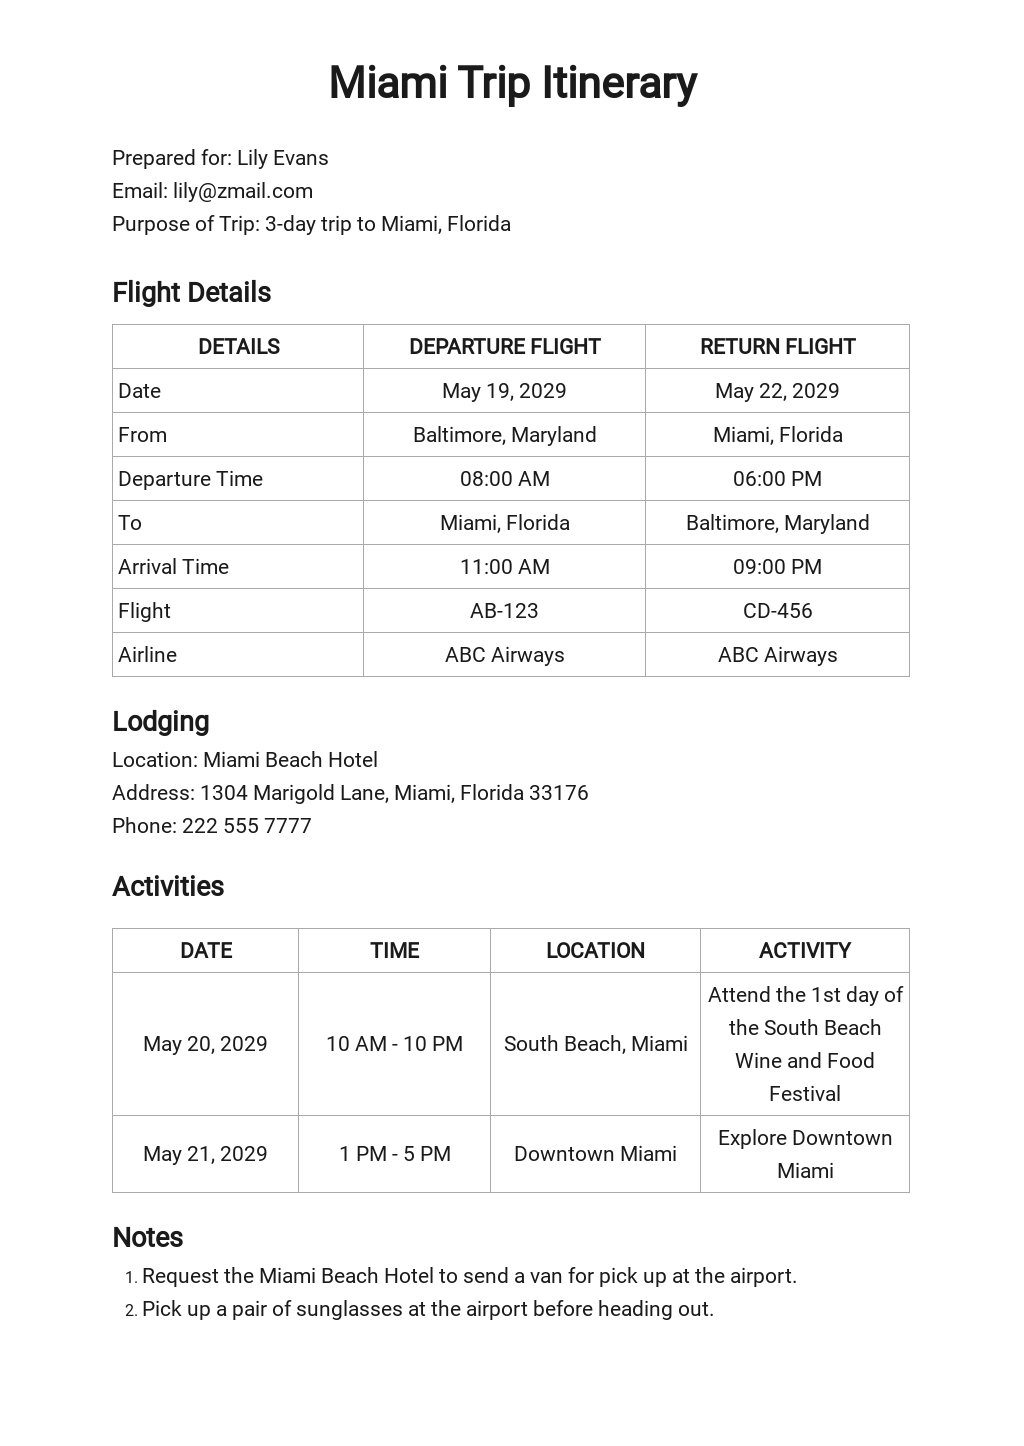 Travel Itinerary Template Images